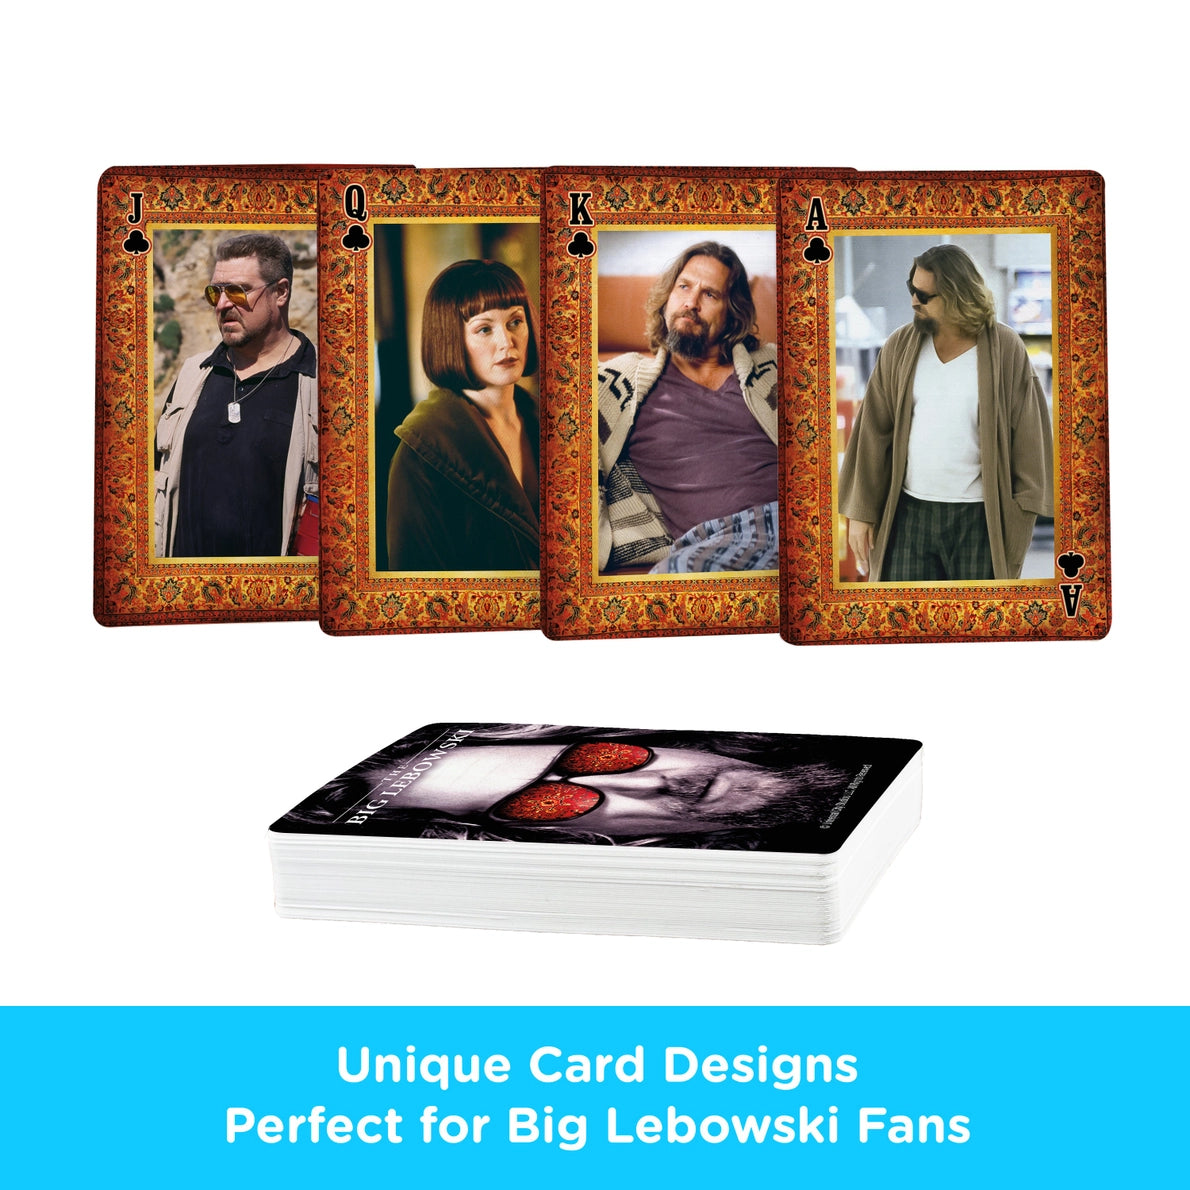 The Big Lebowski Playing Cards by Aquarius - Ties the Game Room Together